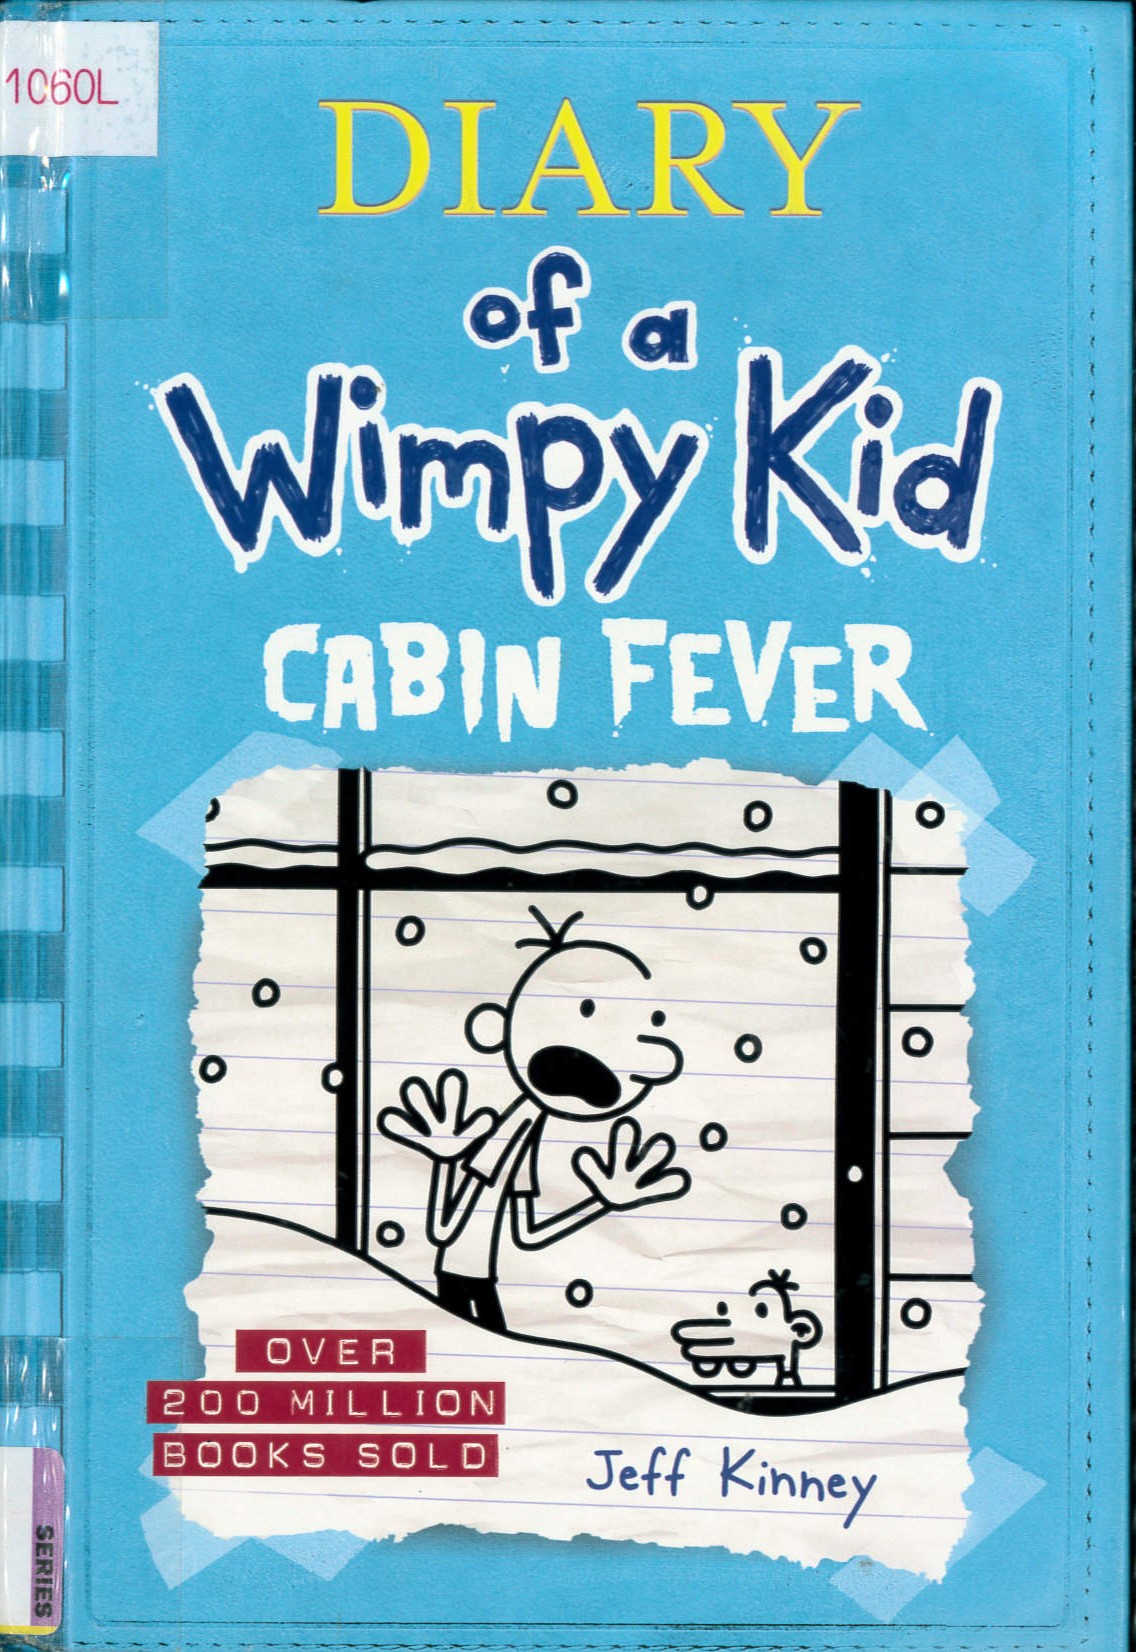 Diary of a wimpy kid(6) : cabin fever /